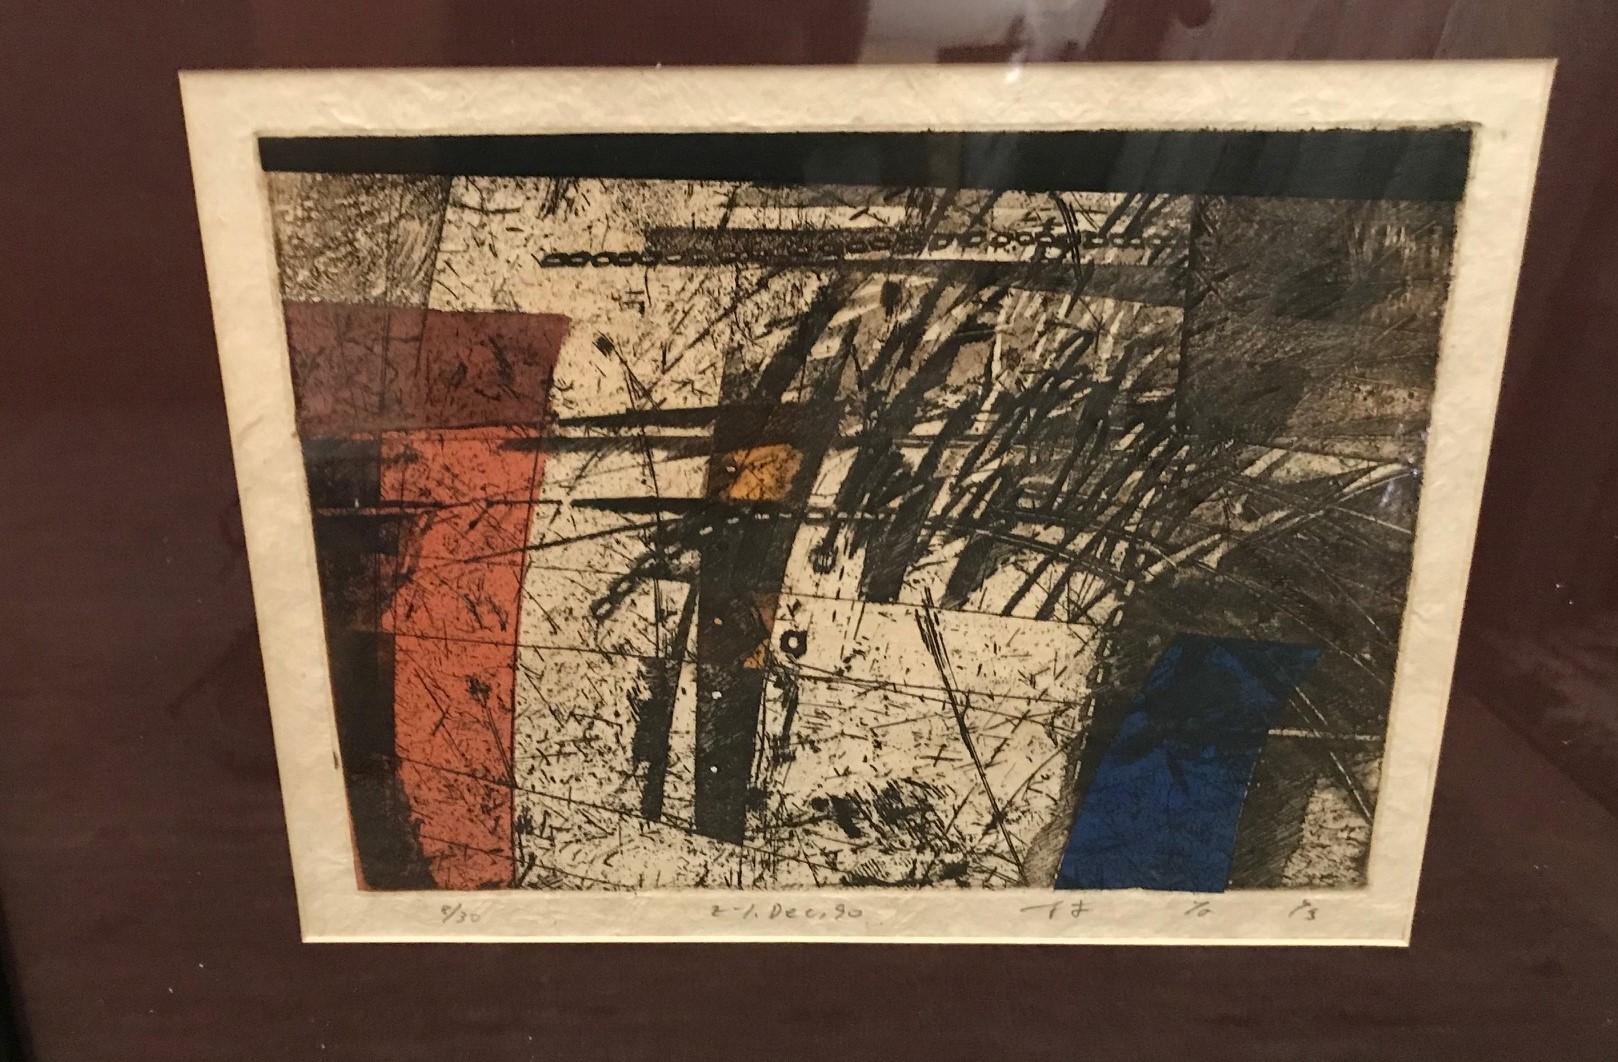 A wonderful abstract Japanese print. Intense composition and colors.

Signed, dated (December 1990), numbered (8/30) and titled in Japanese by the artist.

Appears to be printed on Momigami paper.

Framed dimensions: 15